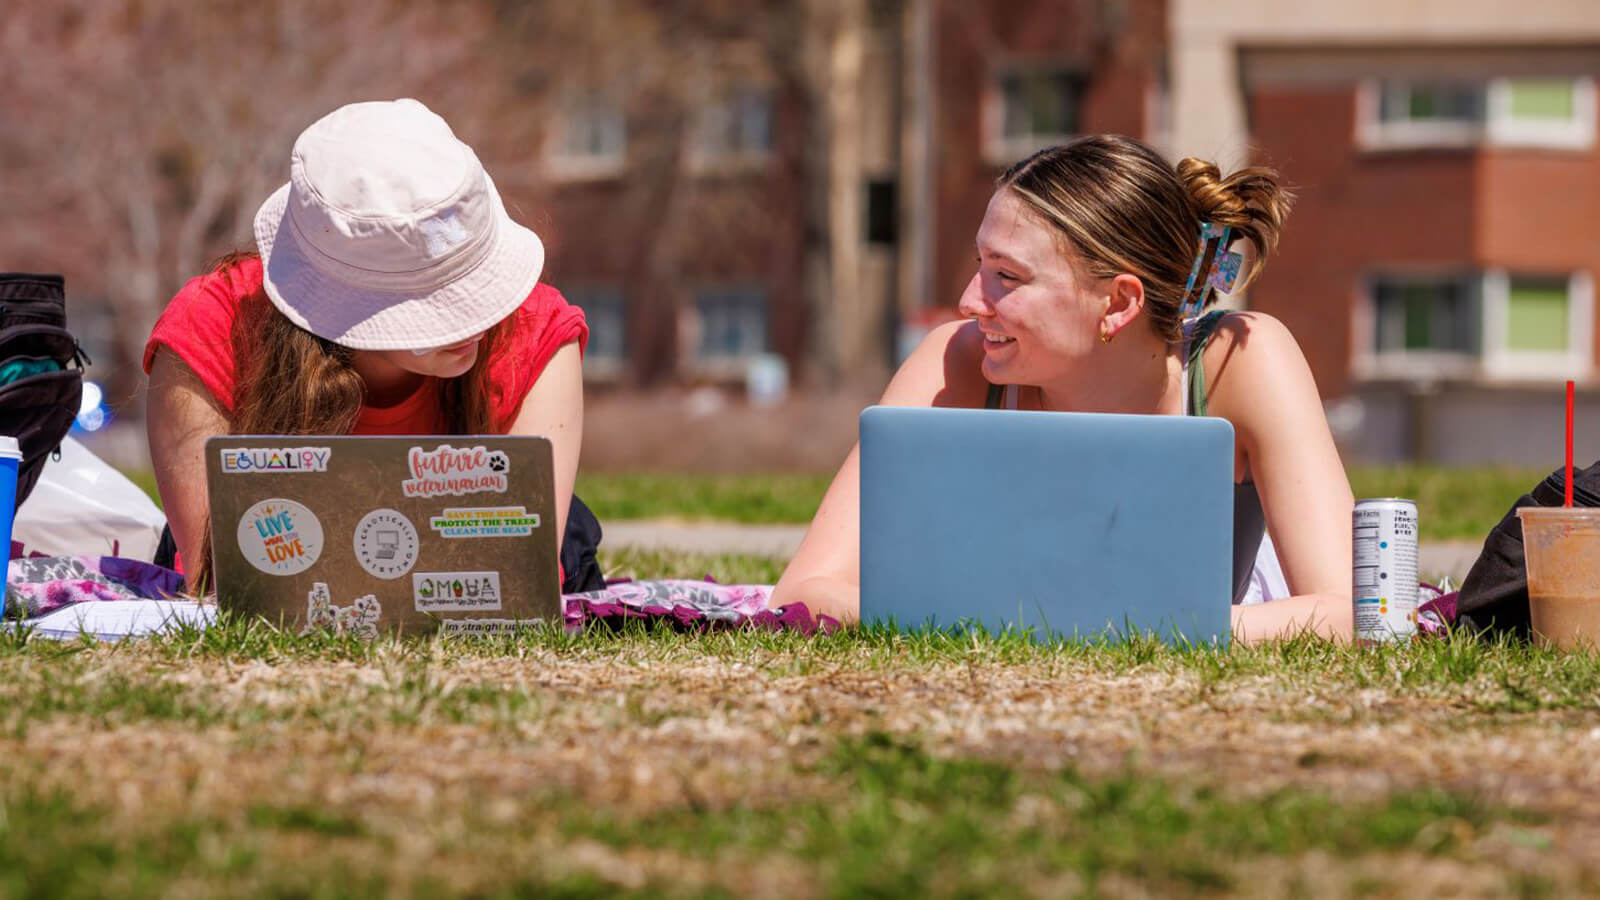 Students, with laptops open, talk outdoors on a sunny day.